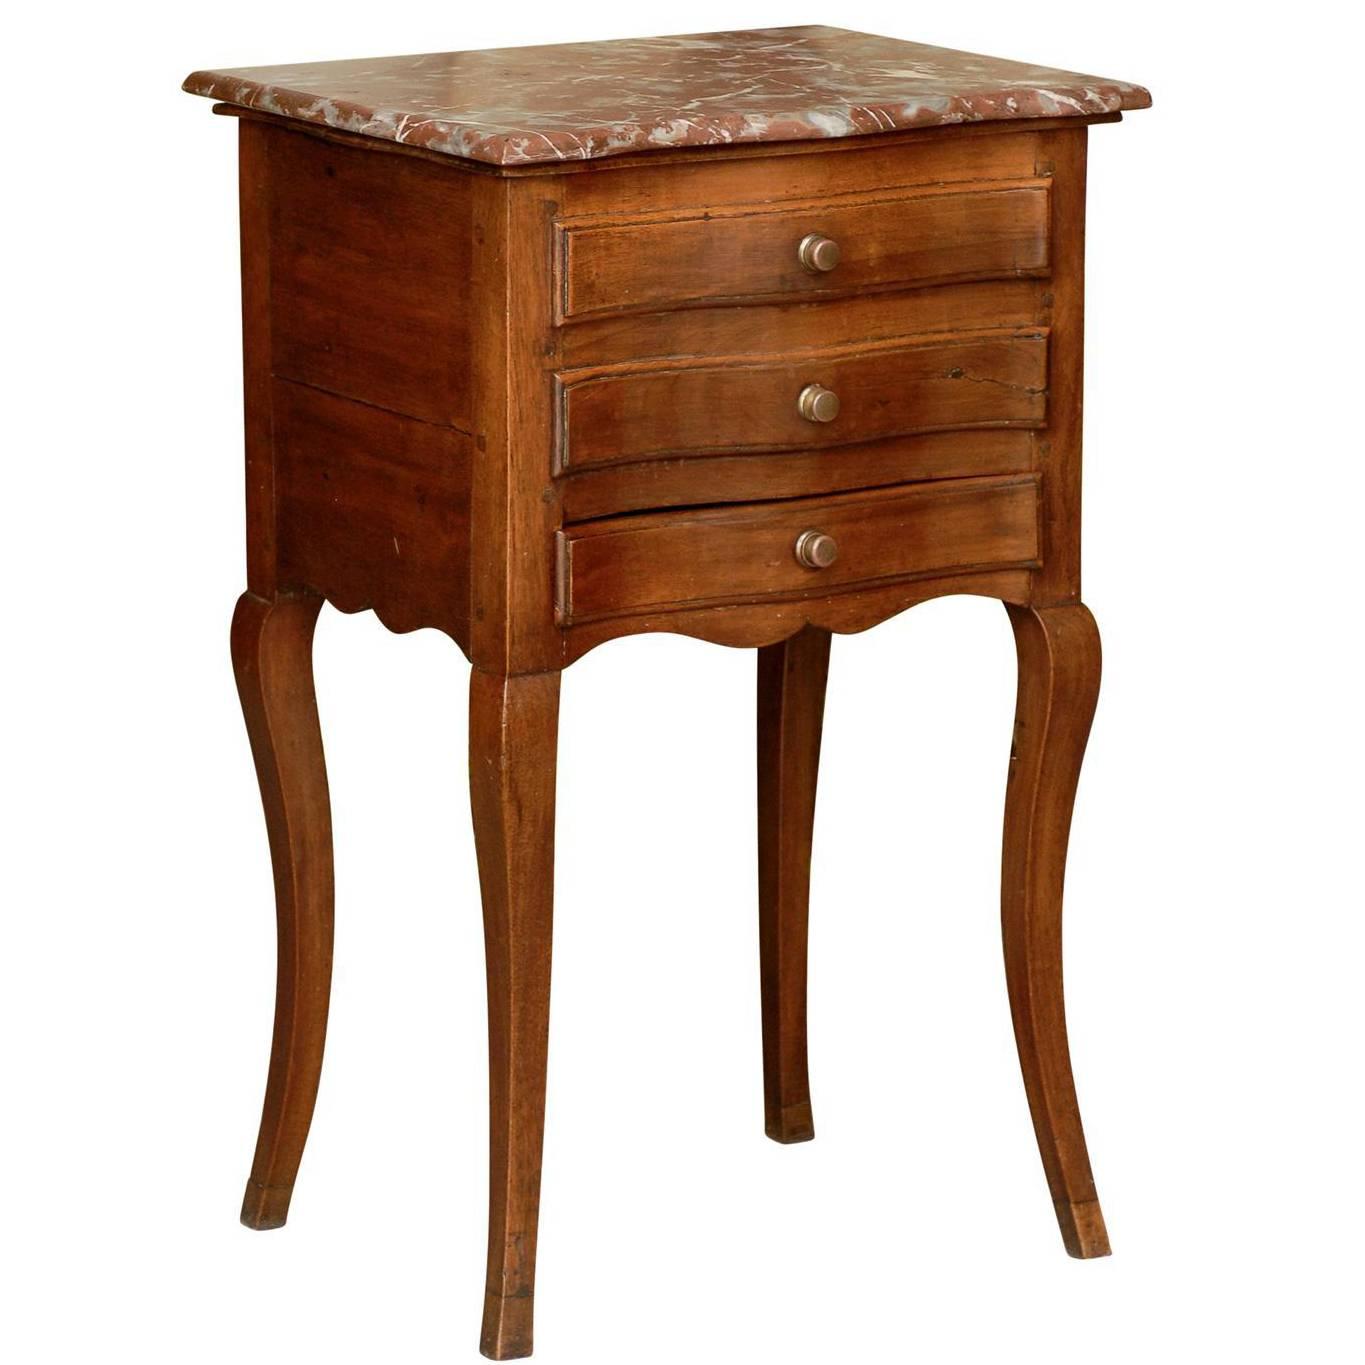 French Serpentine Front Marble Top Petite Commode from the Late 19th Century